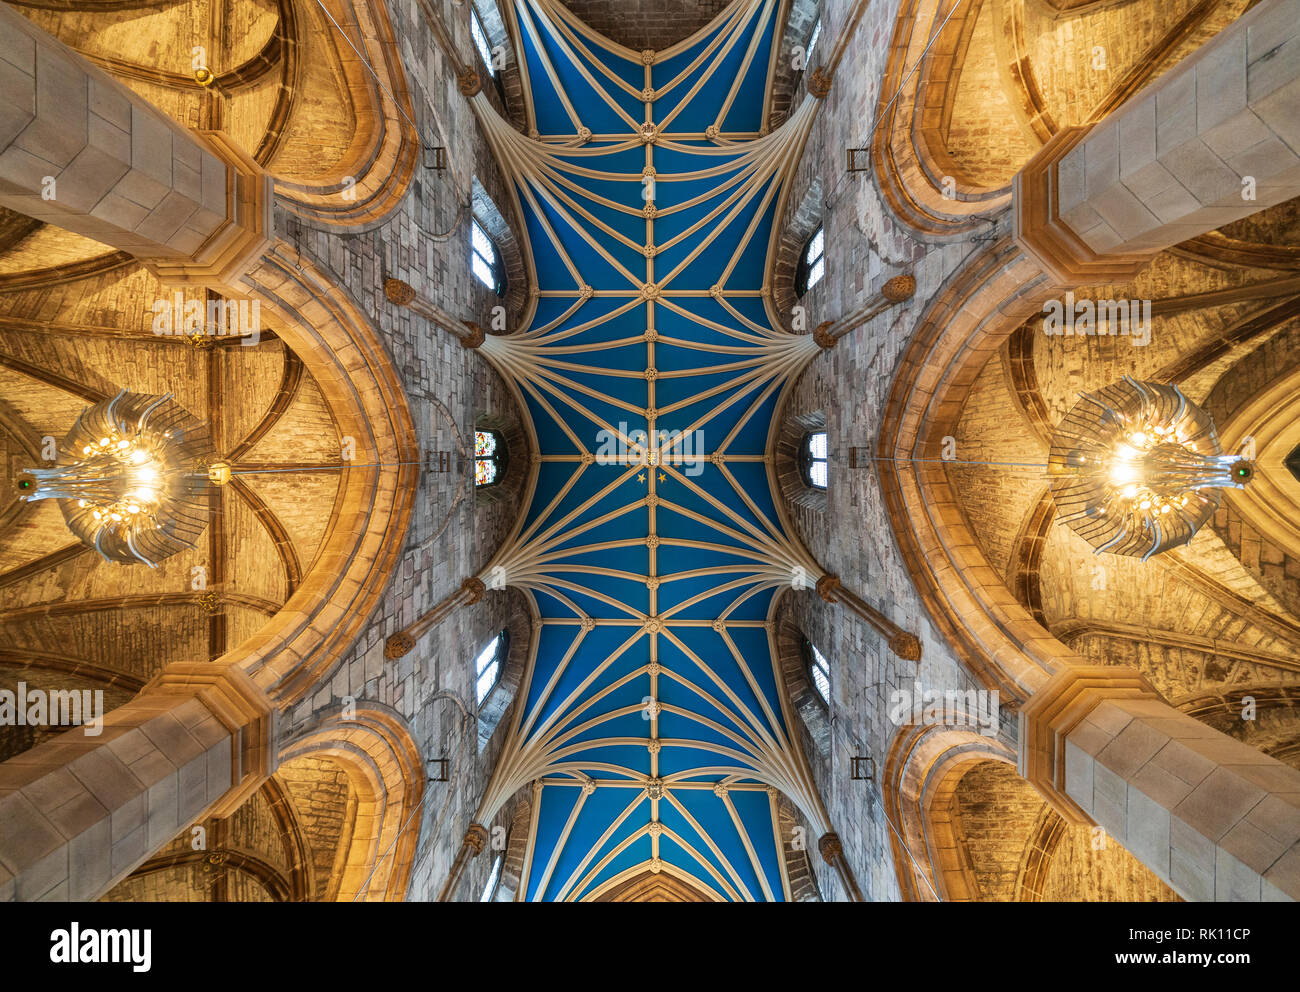 View of ornate roof ceiling of St Giles Cathedral in Edinburgh Old Town, Scotland, UK Stock Photo